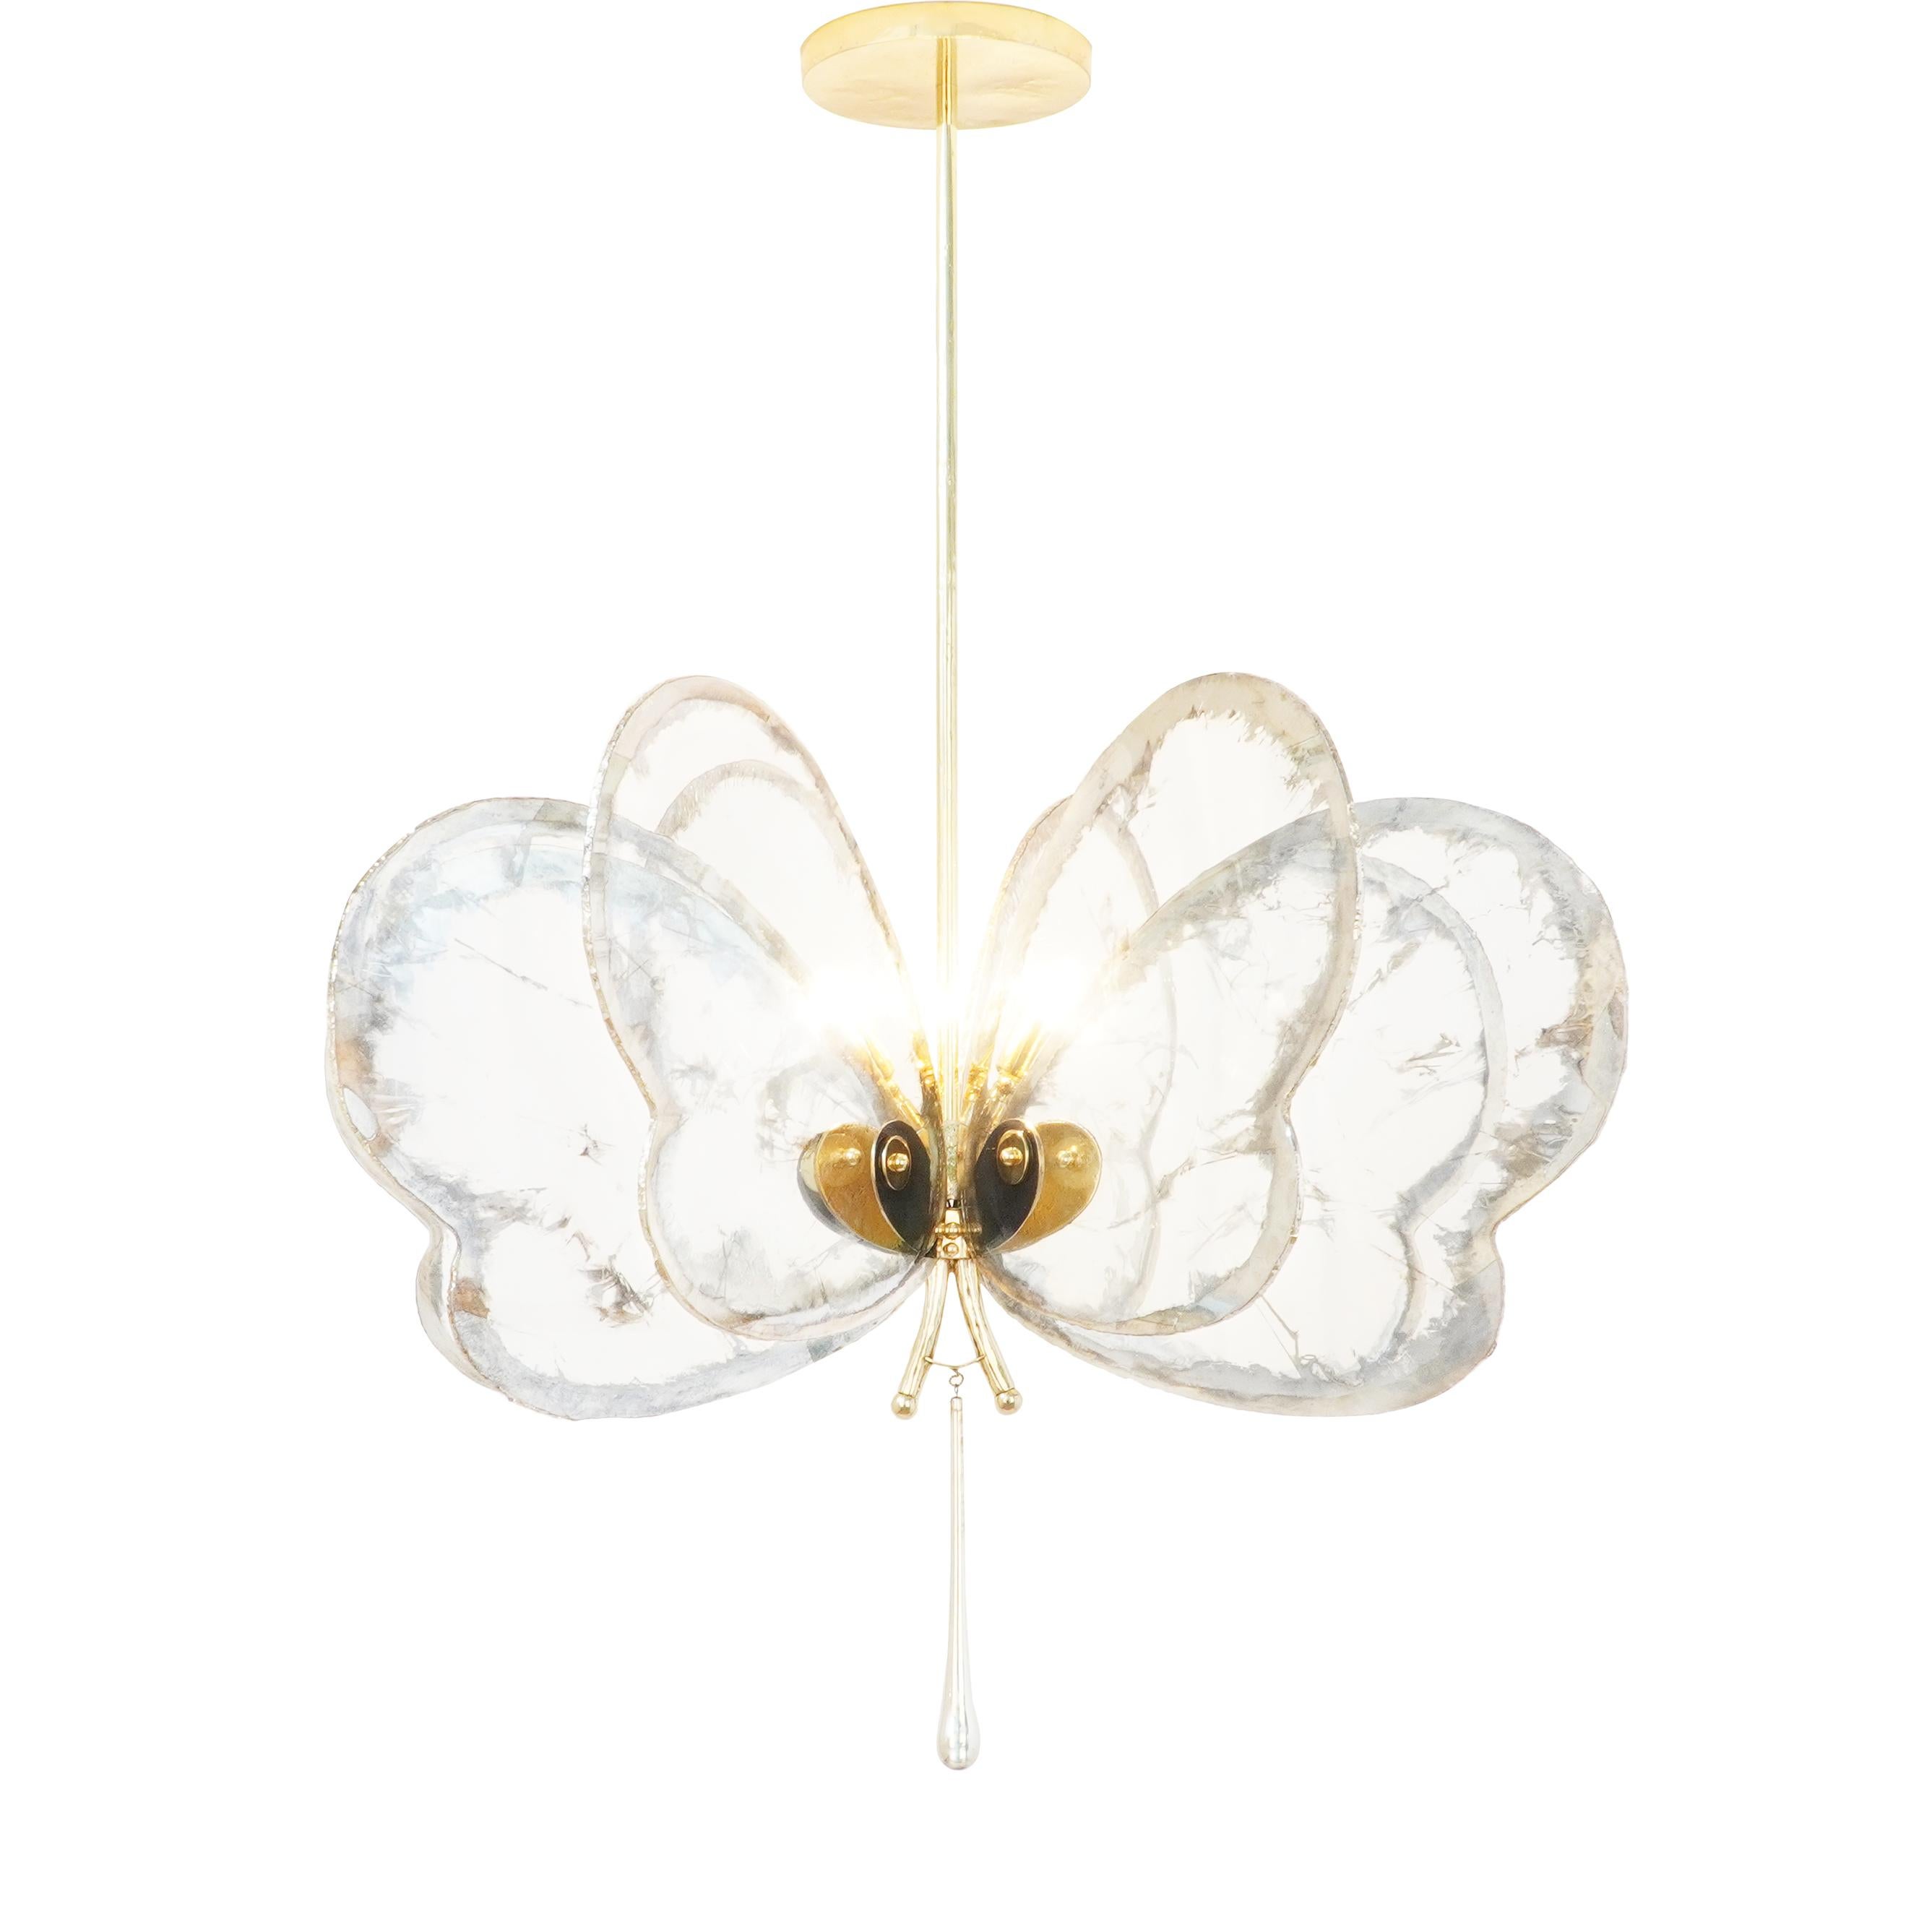 BUTTERFLY Colored glass wings are dancing in the sky

Sabrina Landini for 20 years , pays homage to glass surfaces in her expression of silvered masterworks, the hallmark of each item in collection.

A symbol of joy, optimism and wonder, the